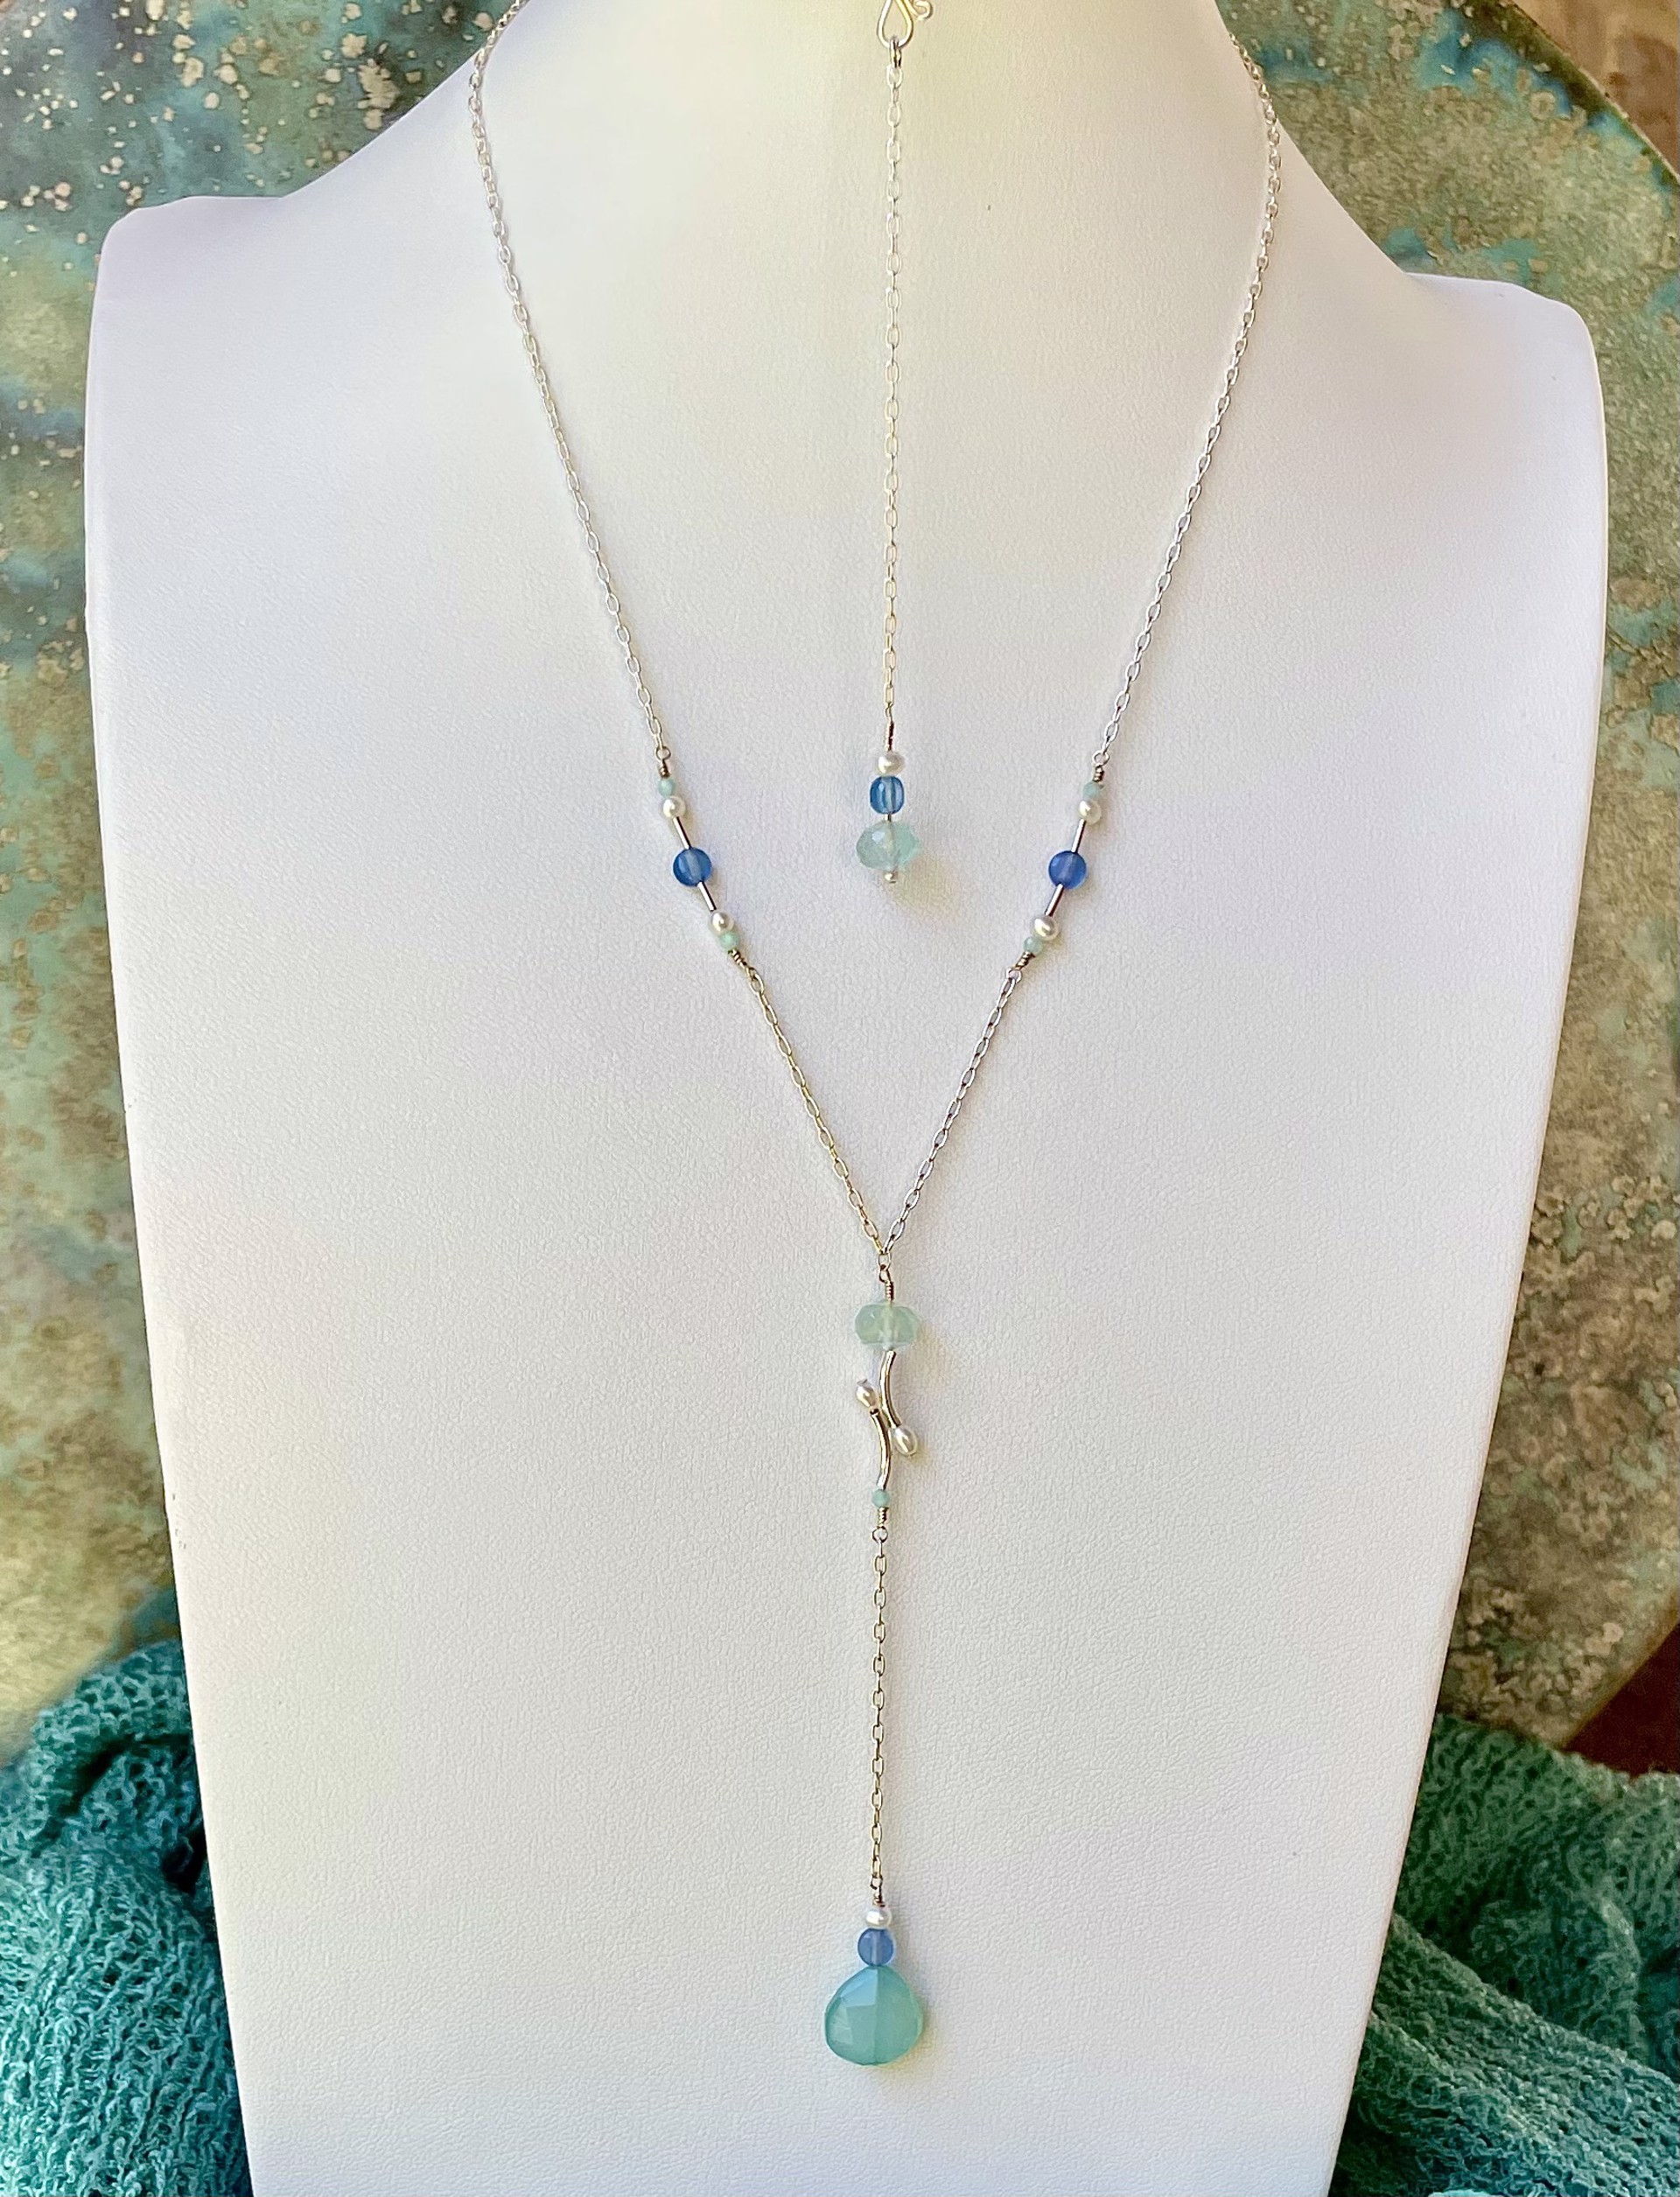 Aqua Chalcedony, Santorini Blue Chalcedony, and Freshwater Pearls Sterling Silver Necklace by Lisa Kelley